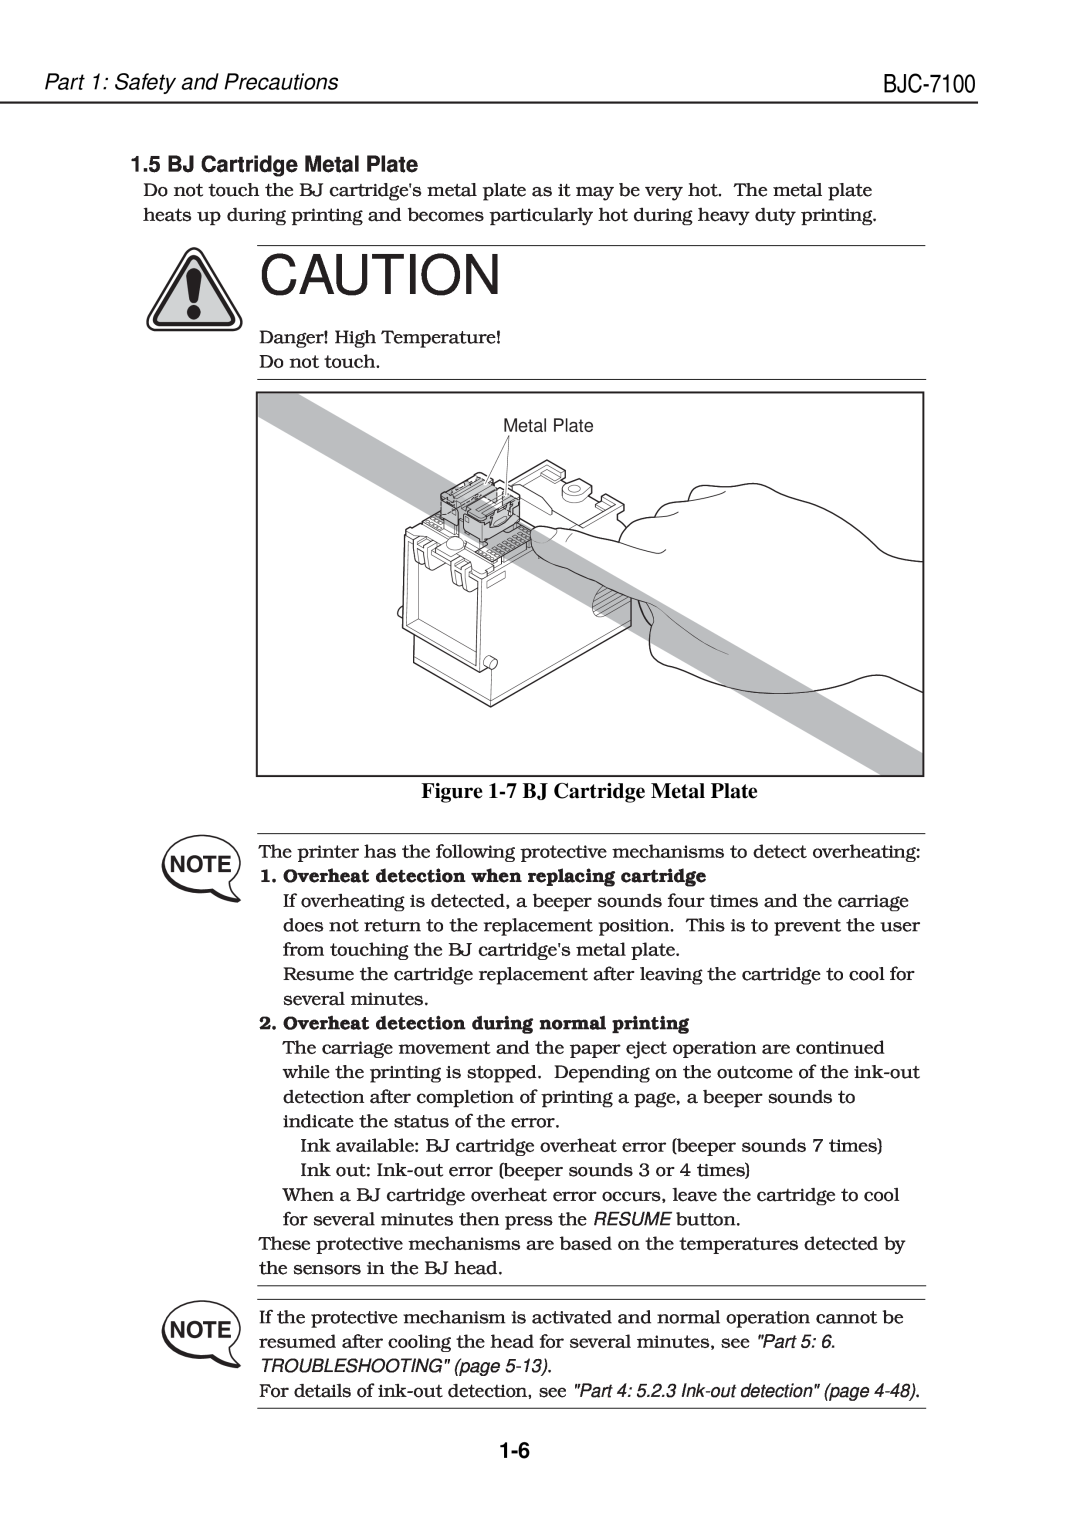 Canon QY8-1360-000 manual 7 BJ Cartridge Metal Plate, Part 1 Safety and Precautions, BJC-7100 